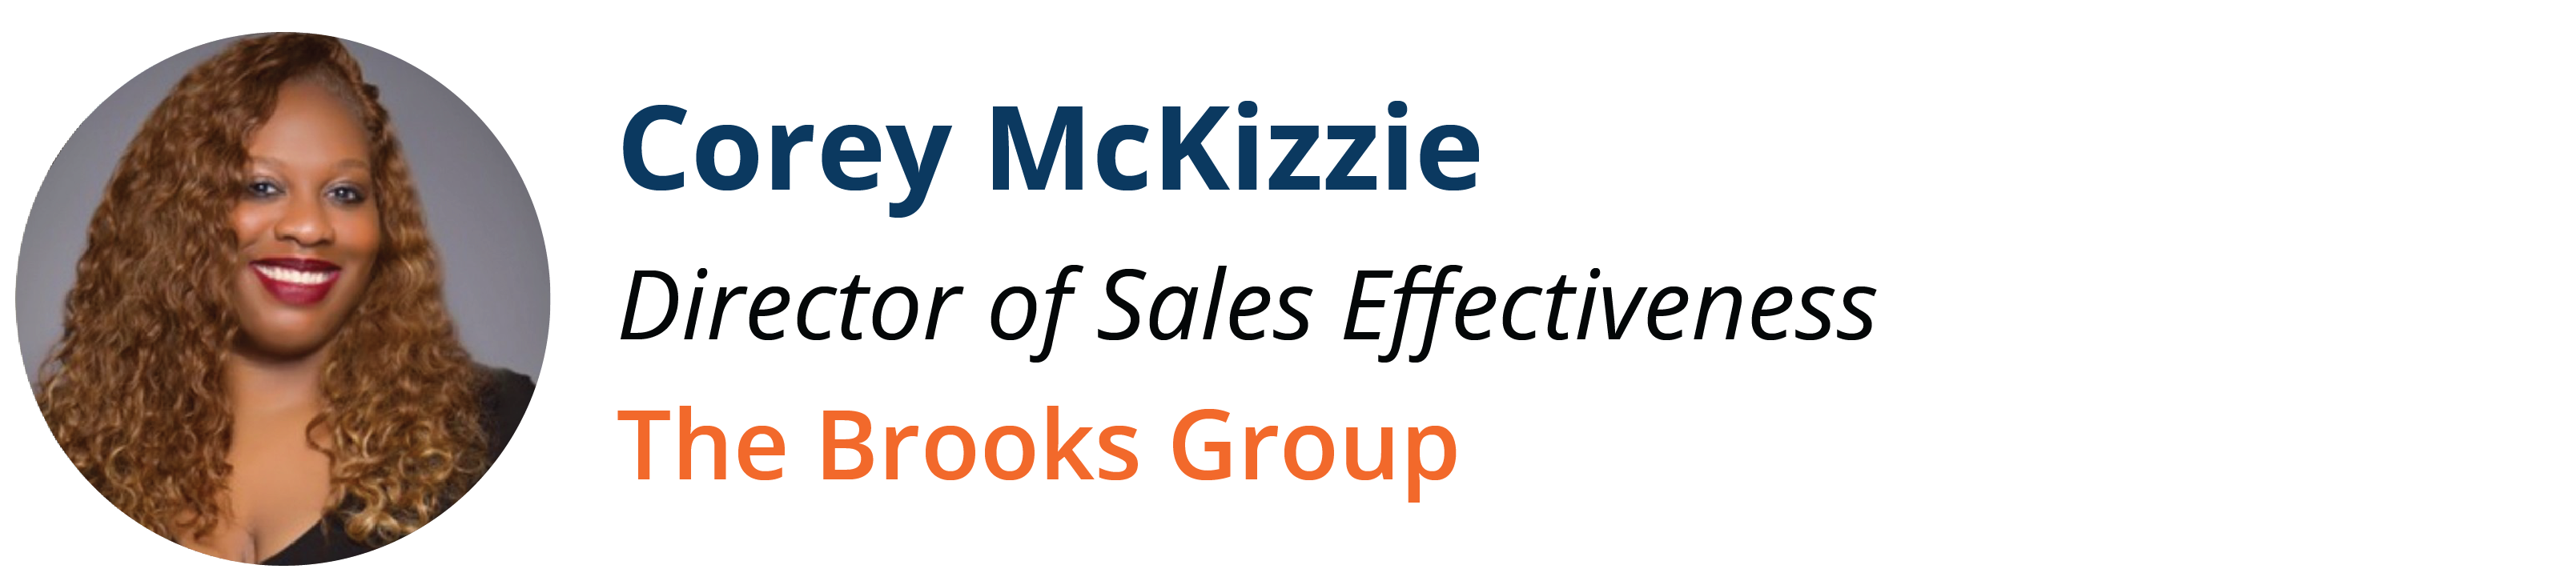 Corey McKizzie speaker of Selling with Value: How to Build Trust and Close More Deals webinar